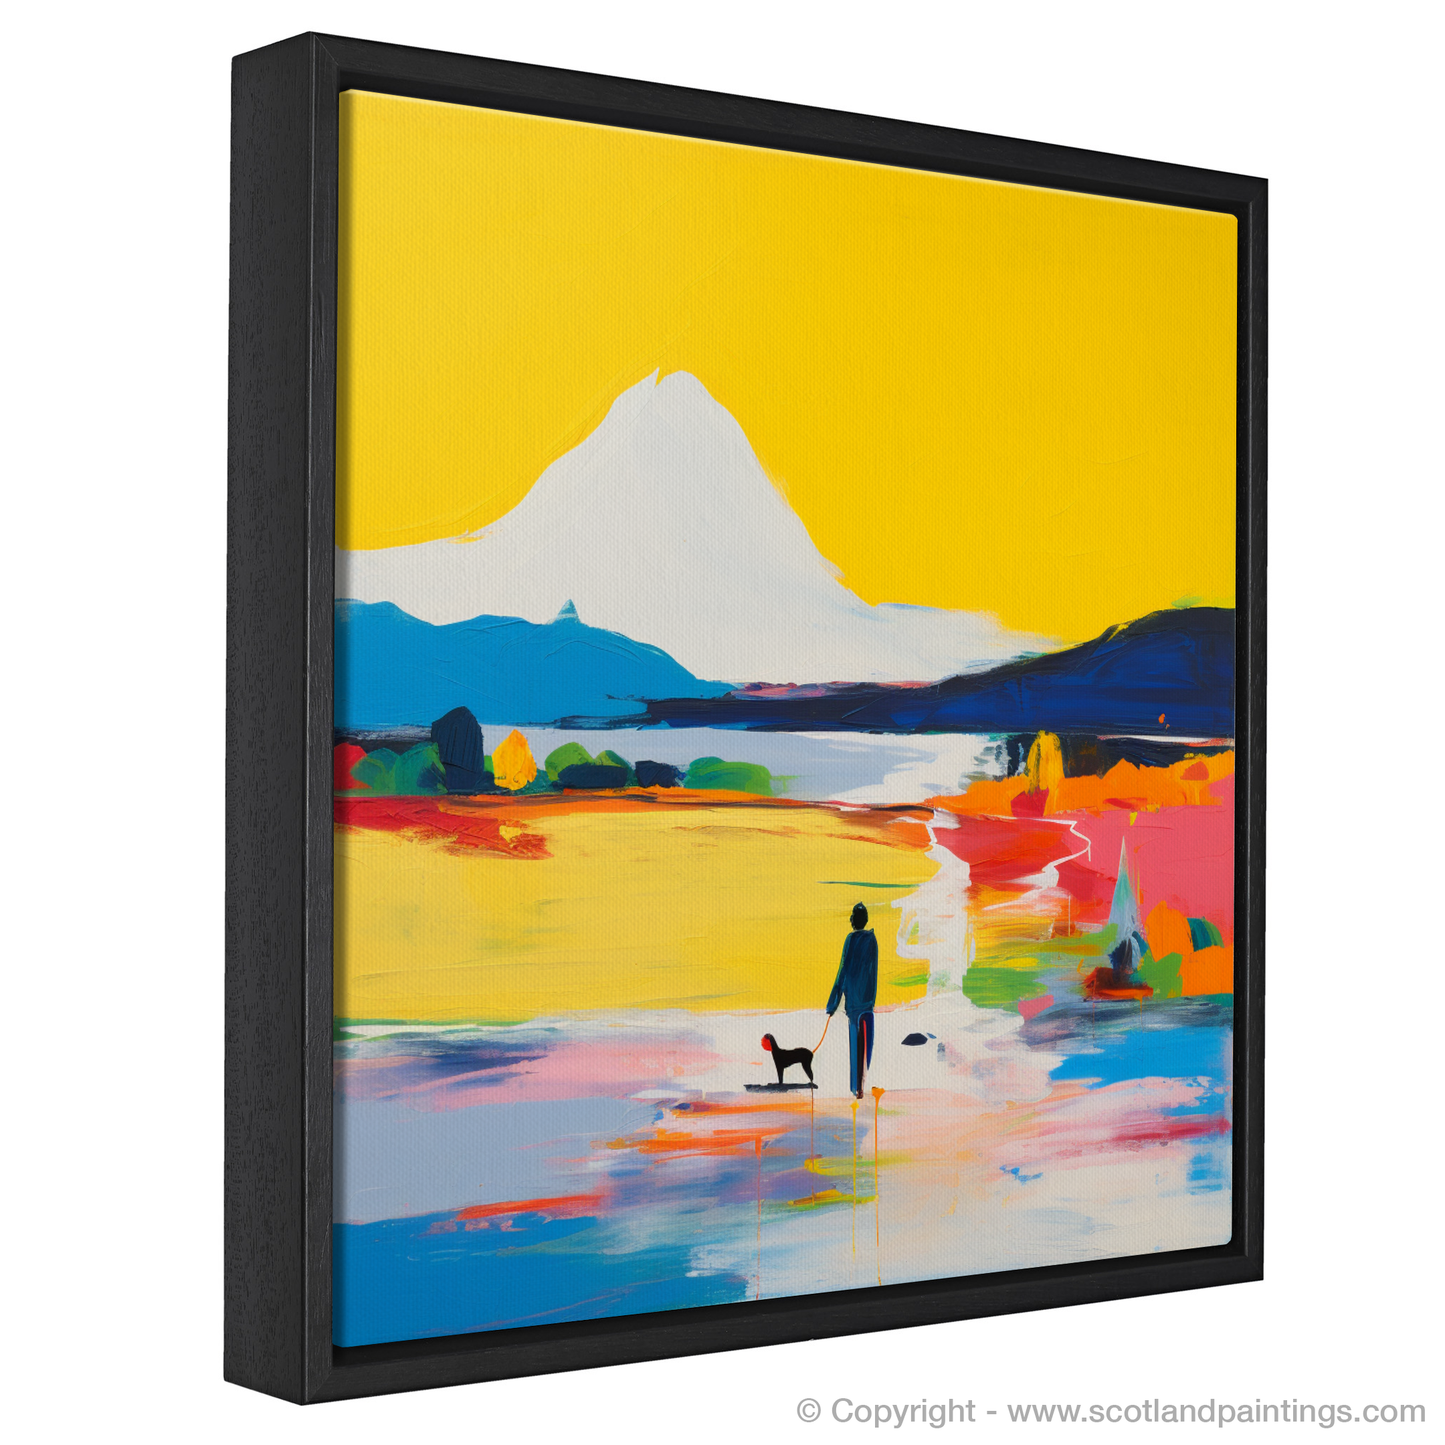 Painting and Art Print of A man walking dog at the side of Loch Lomond entitled "Loch Lomond Twilight: An Abstract Reverie".